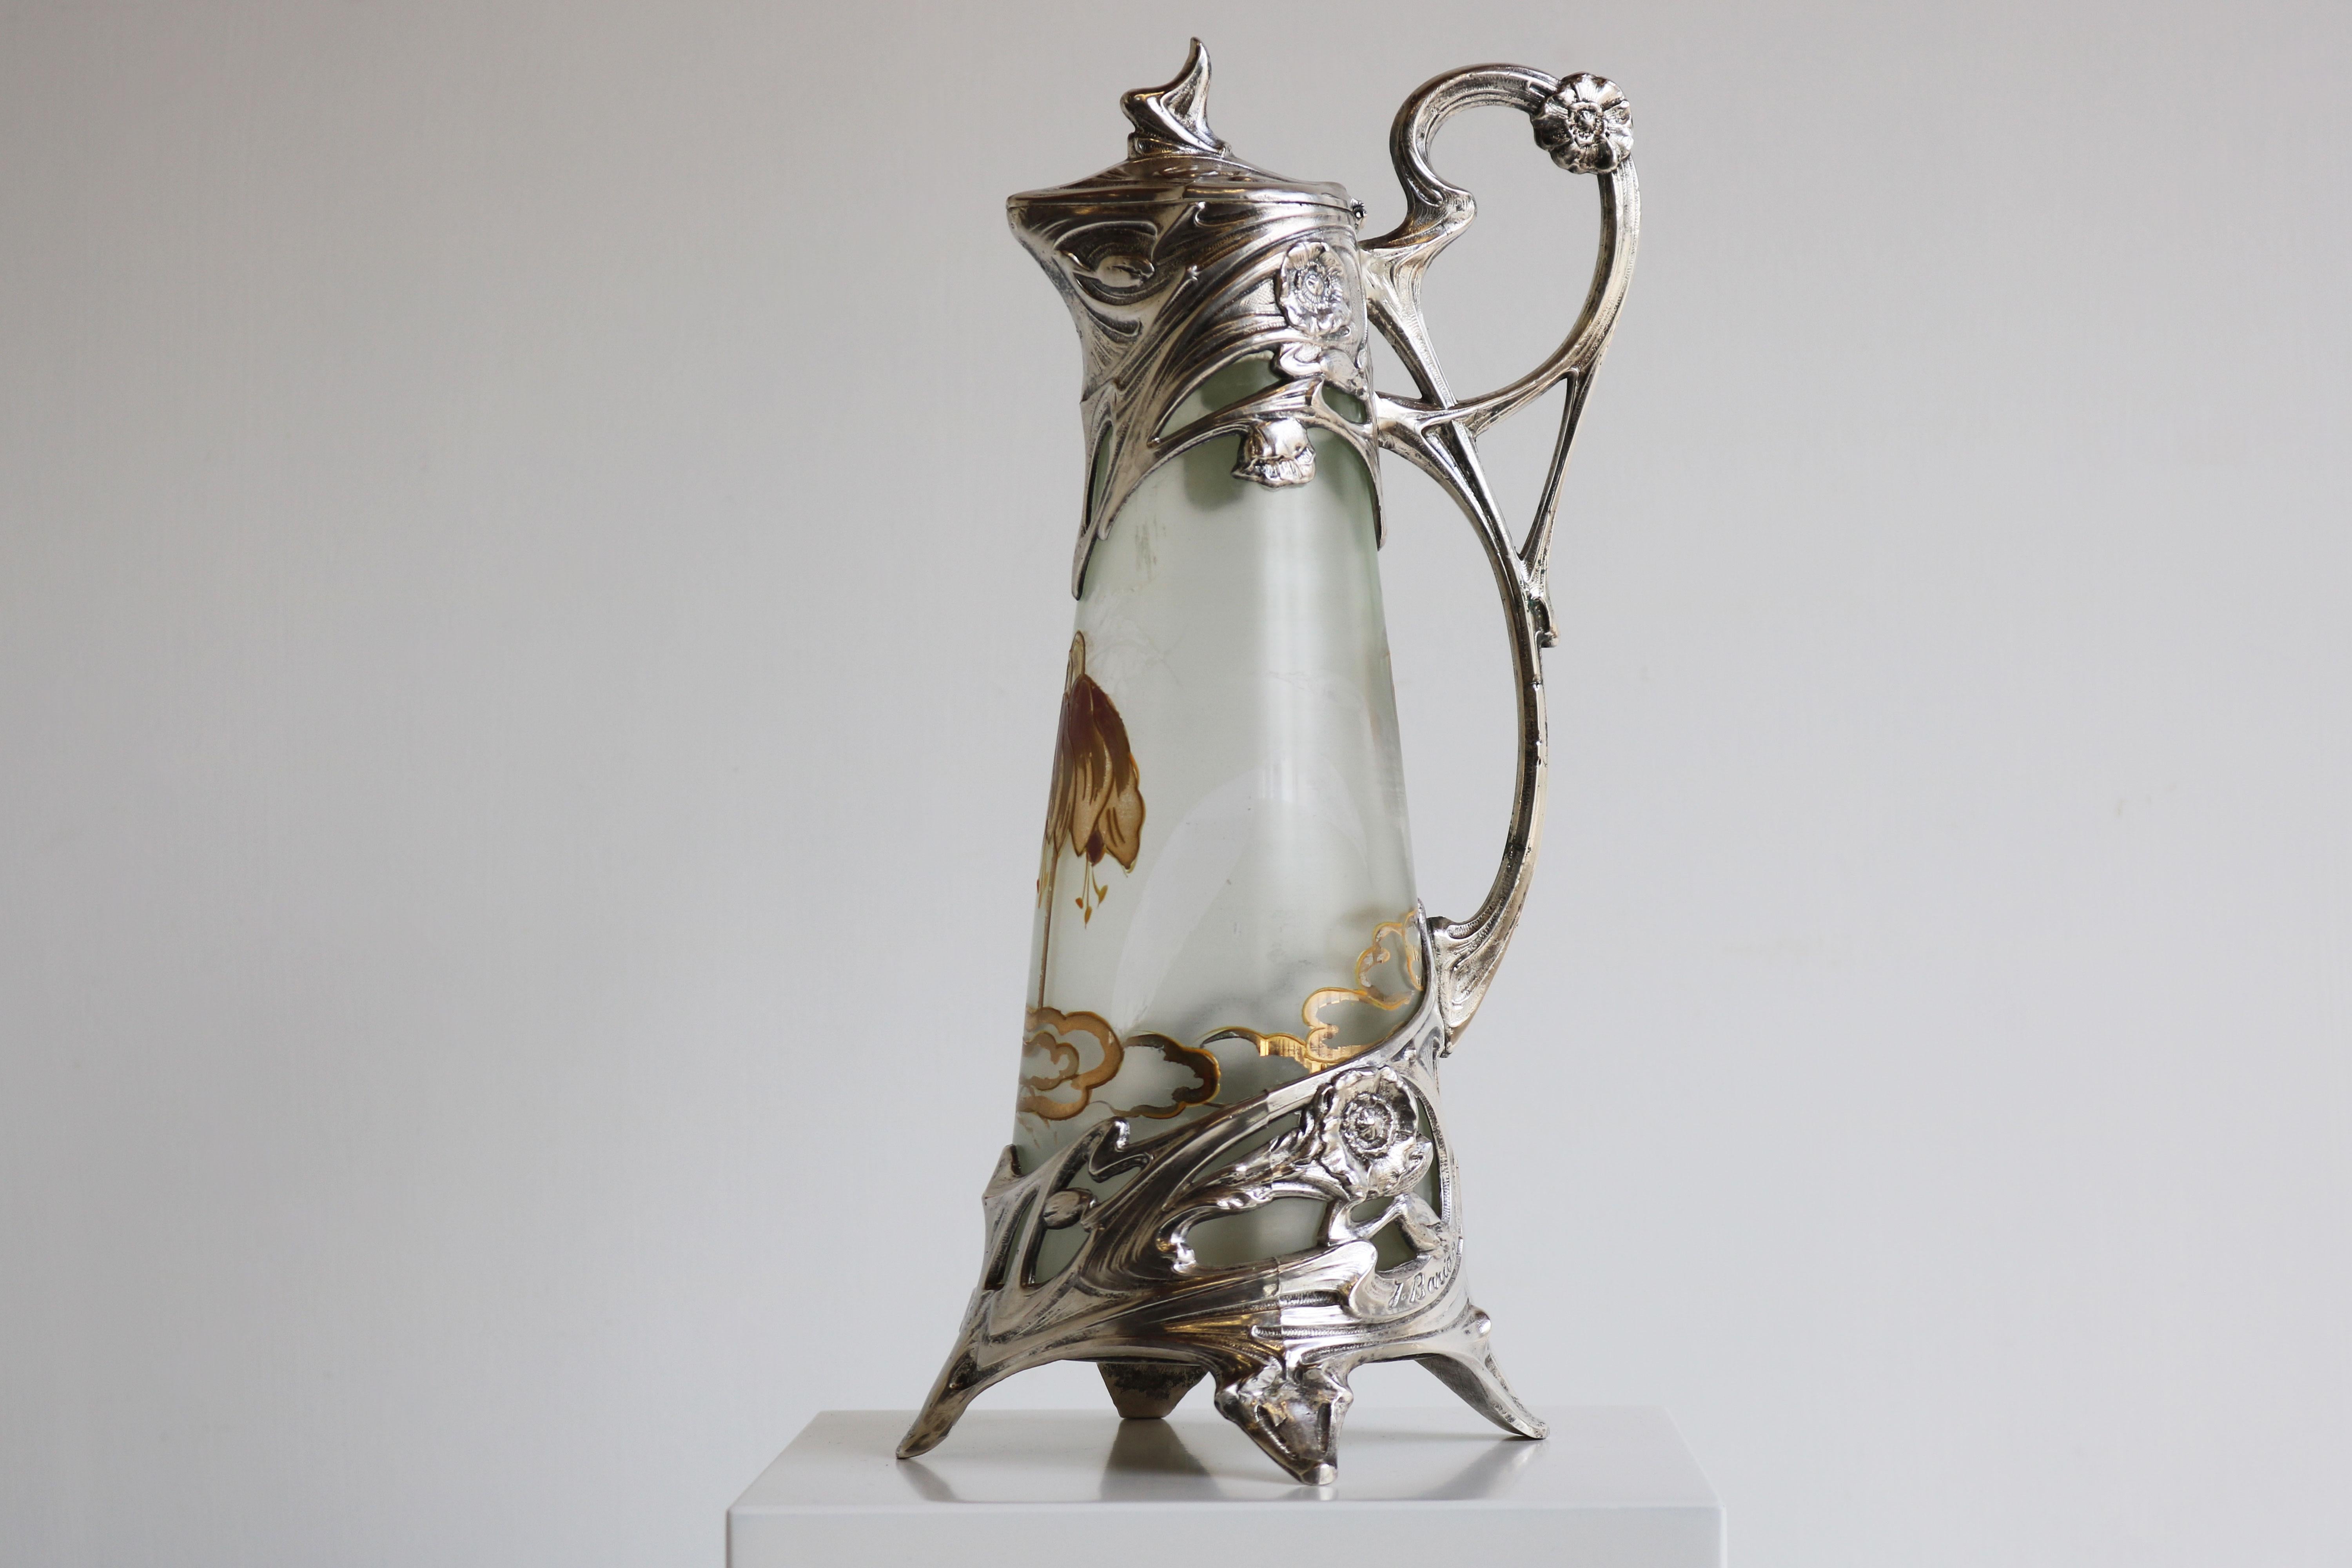 Exquisite French Art Nouveau Decanter / Pitcher by J. Barian Silver Glass 1900 For Sale 4